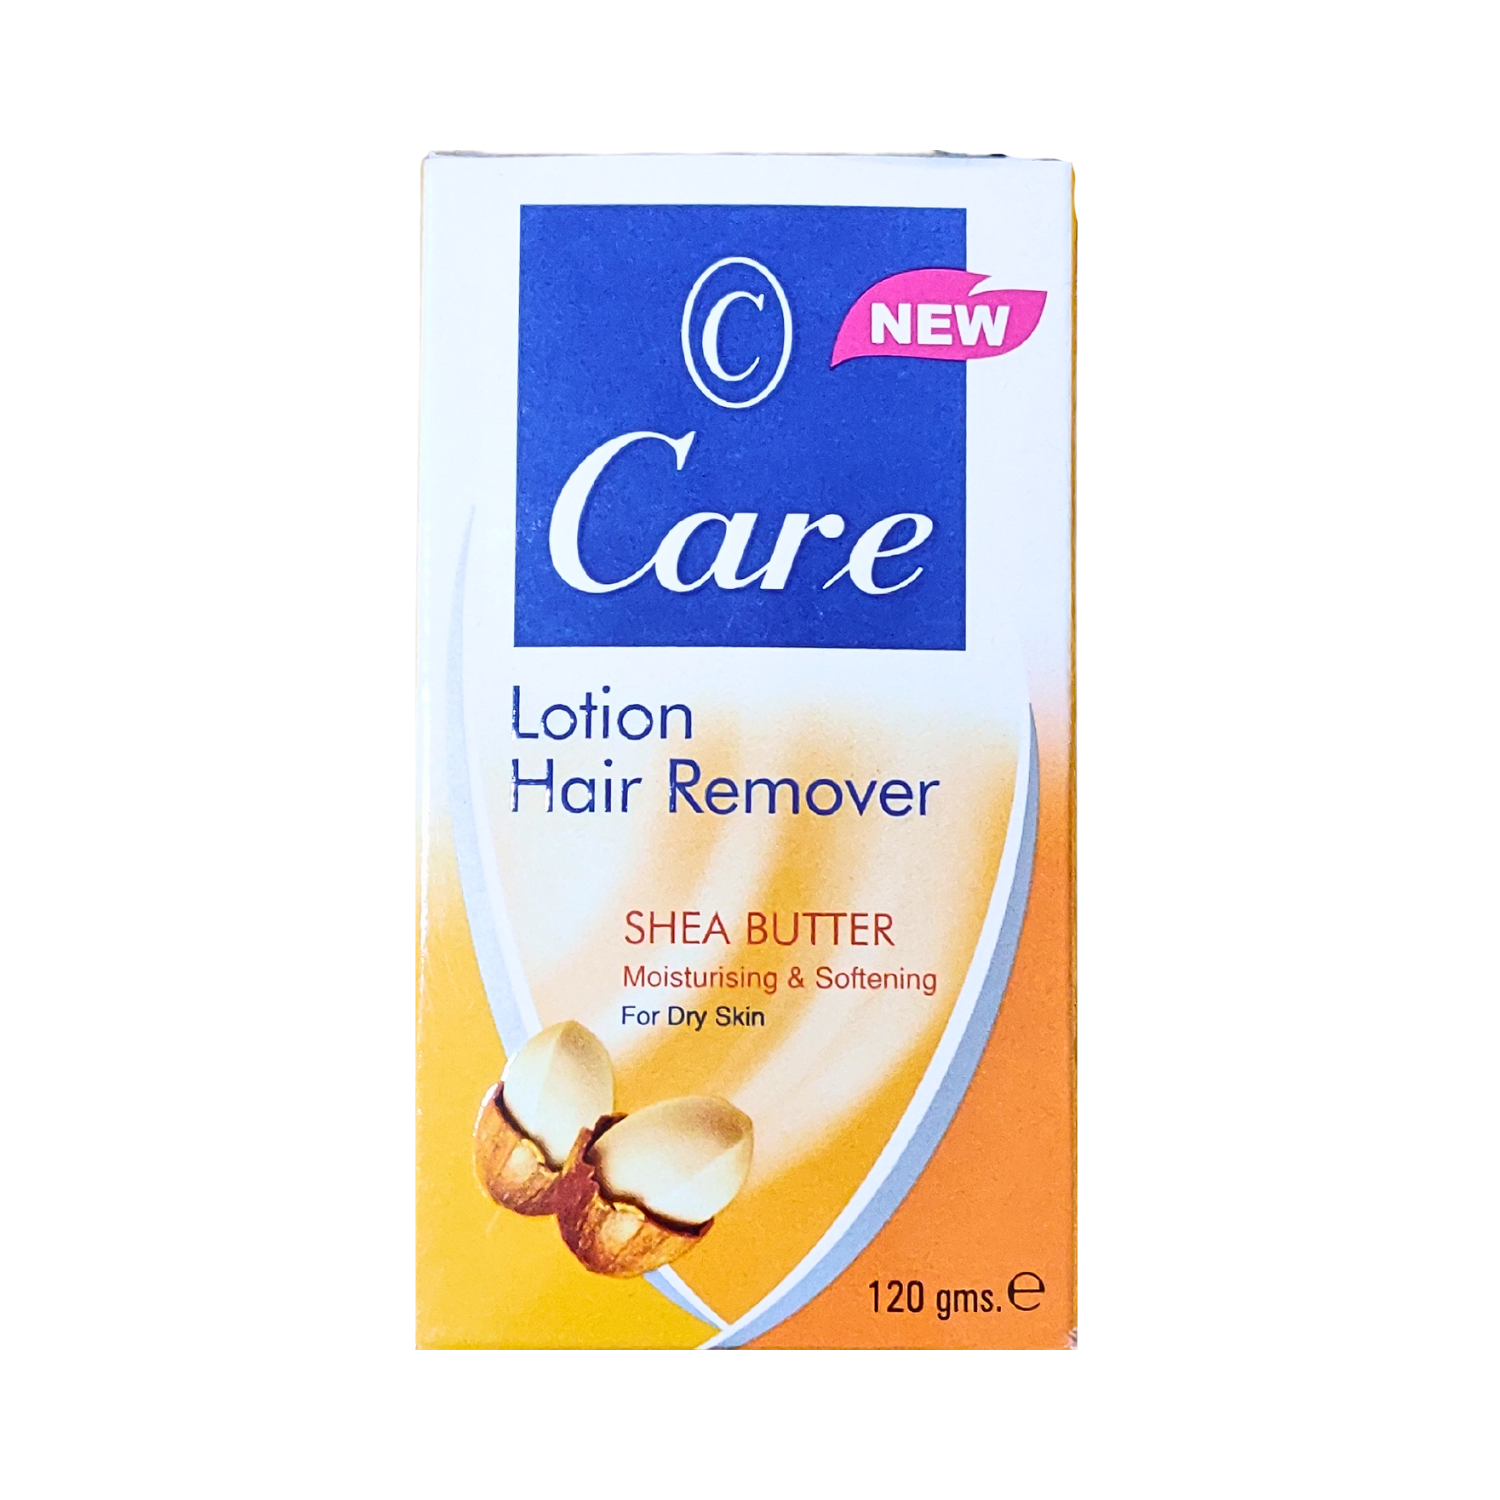 care-hair-remover-lotion-shea-butter-120g